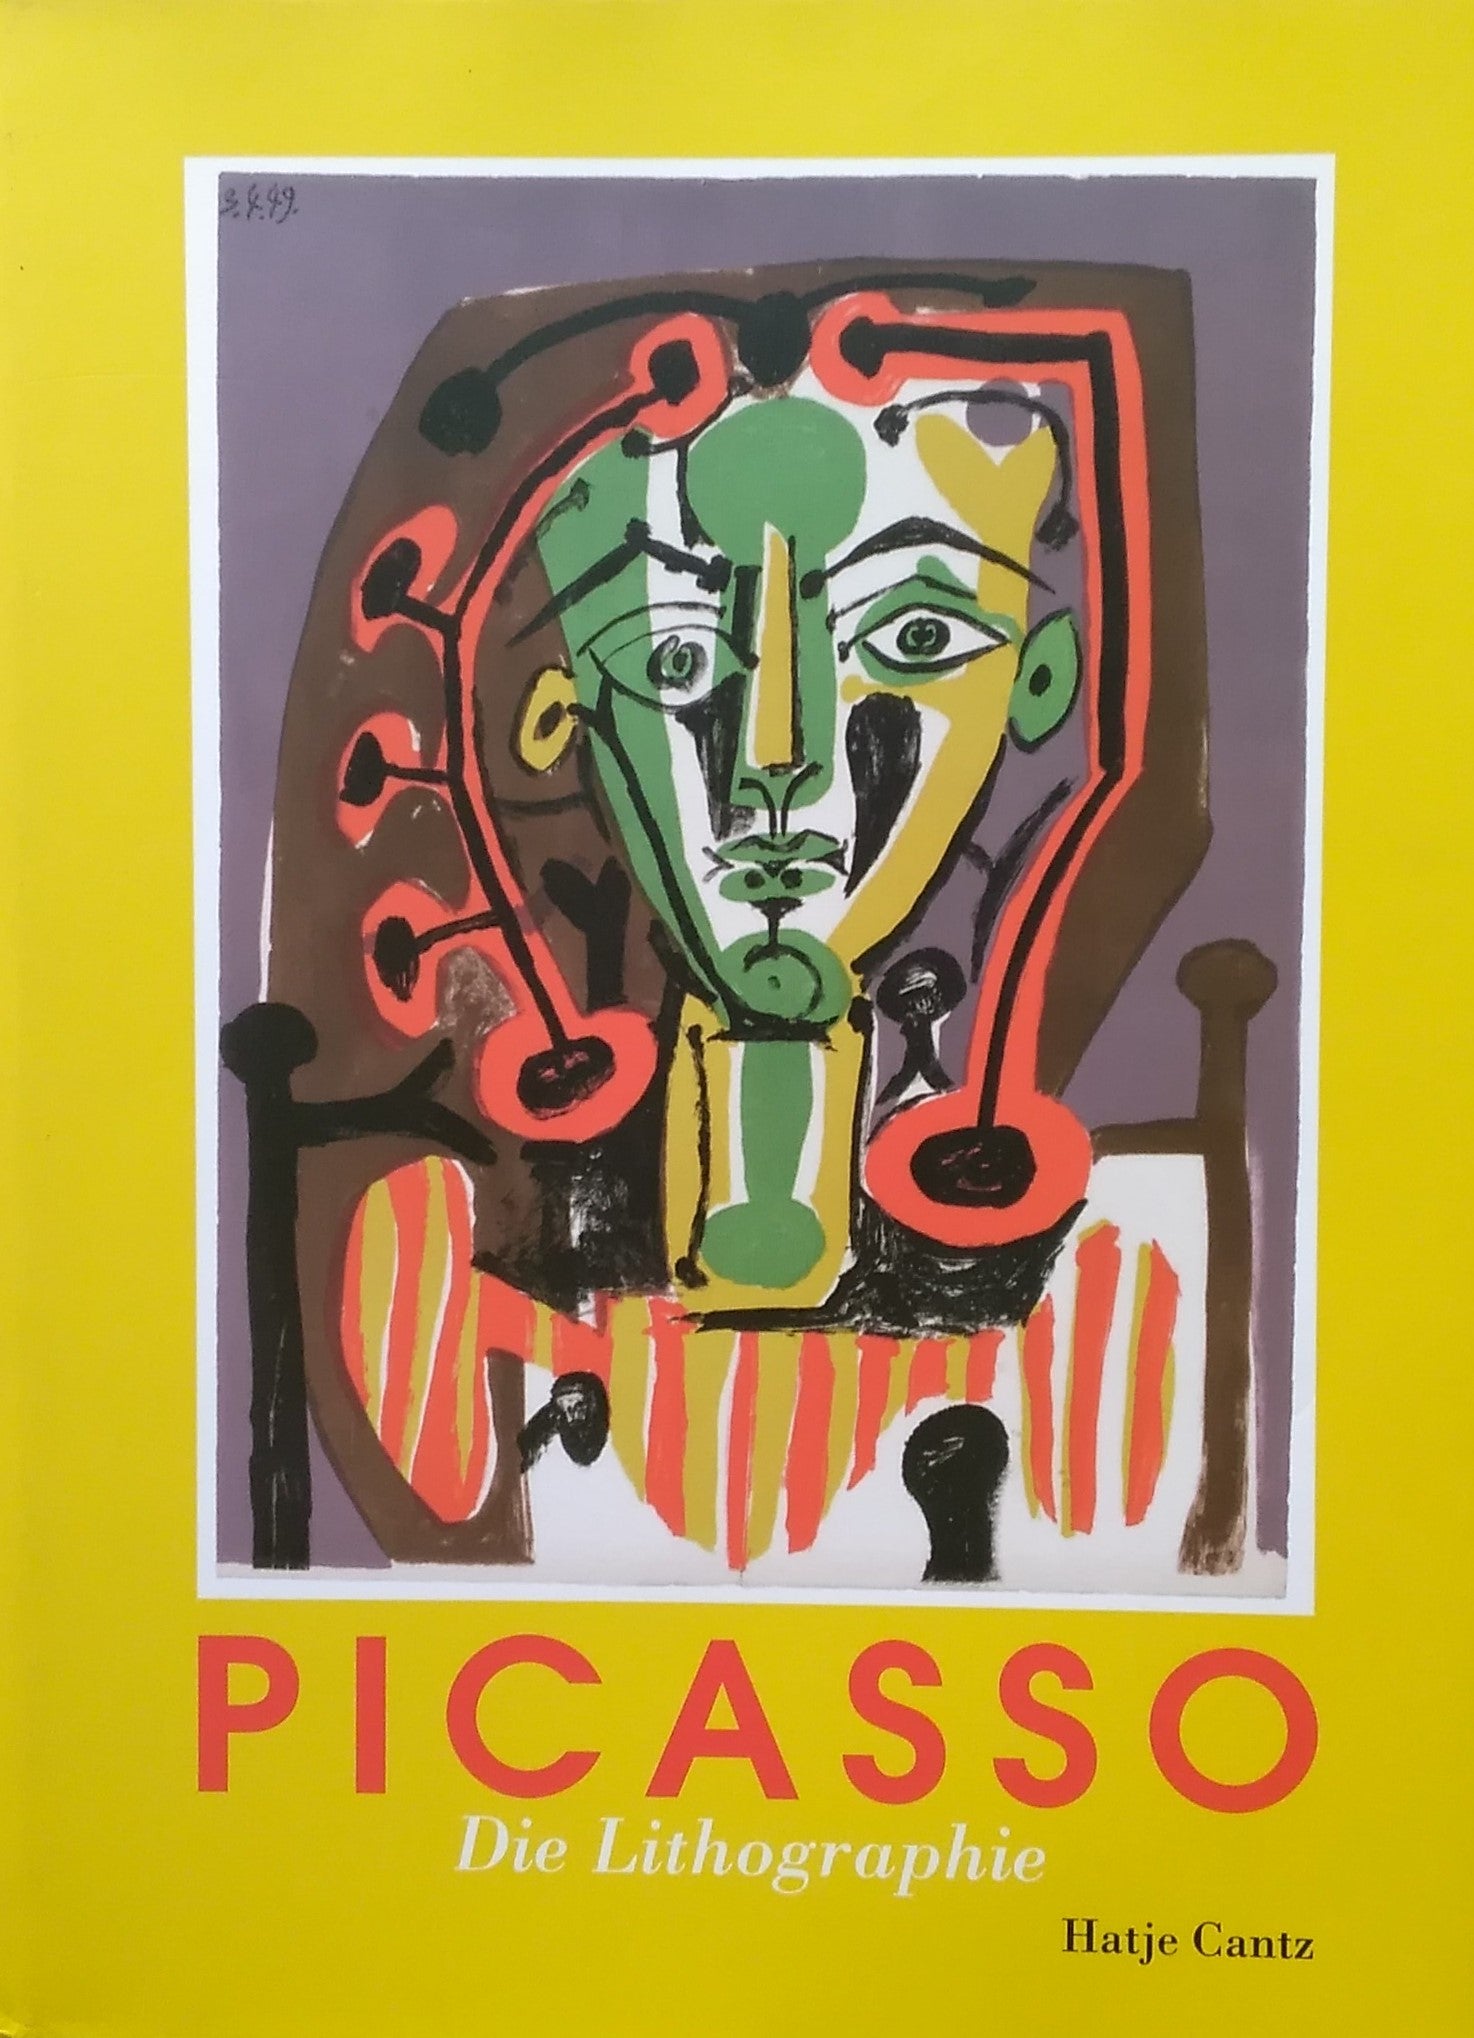 Pablo Picasso　Die Lithographie　パブロ・ピカソ